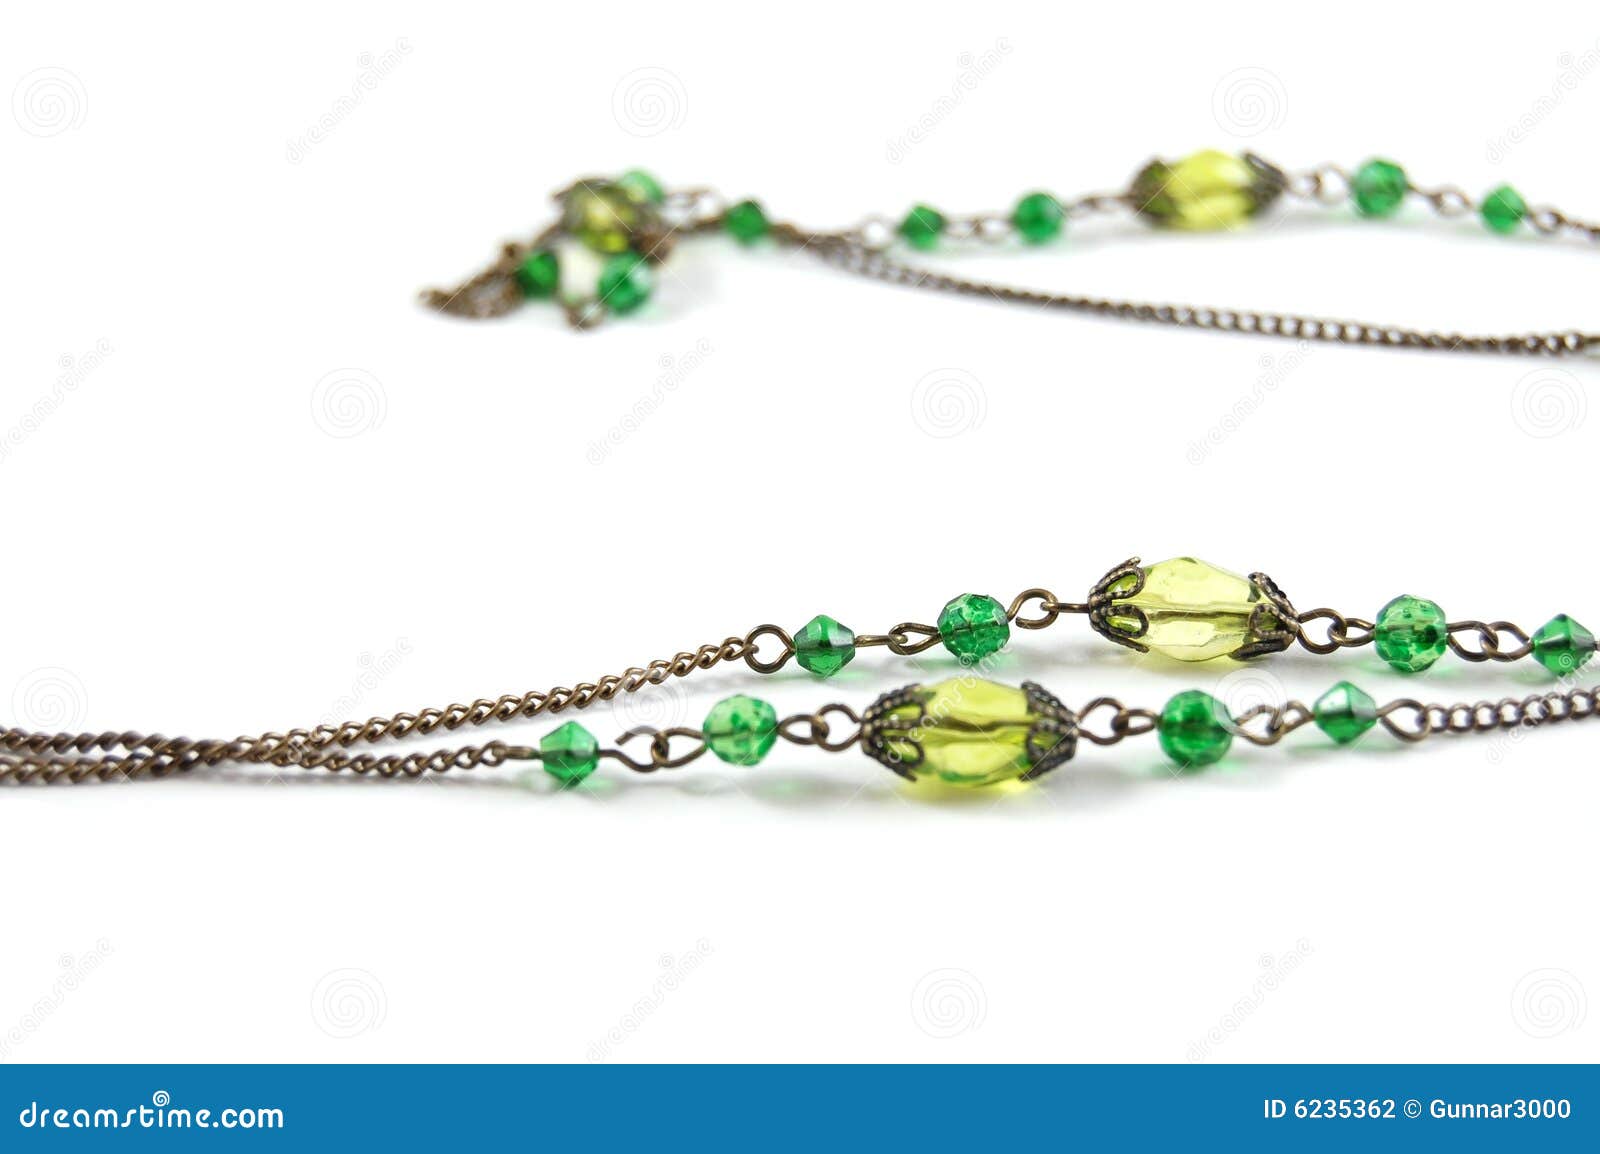 Modern necklace isolated on a white background